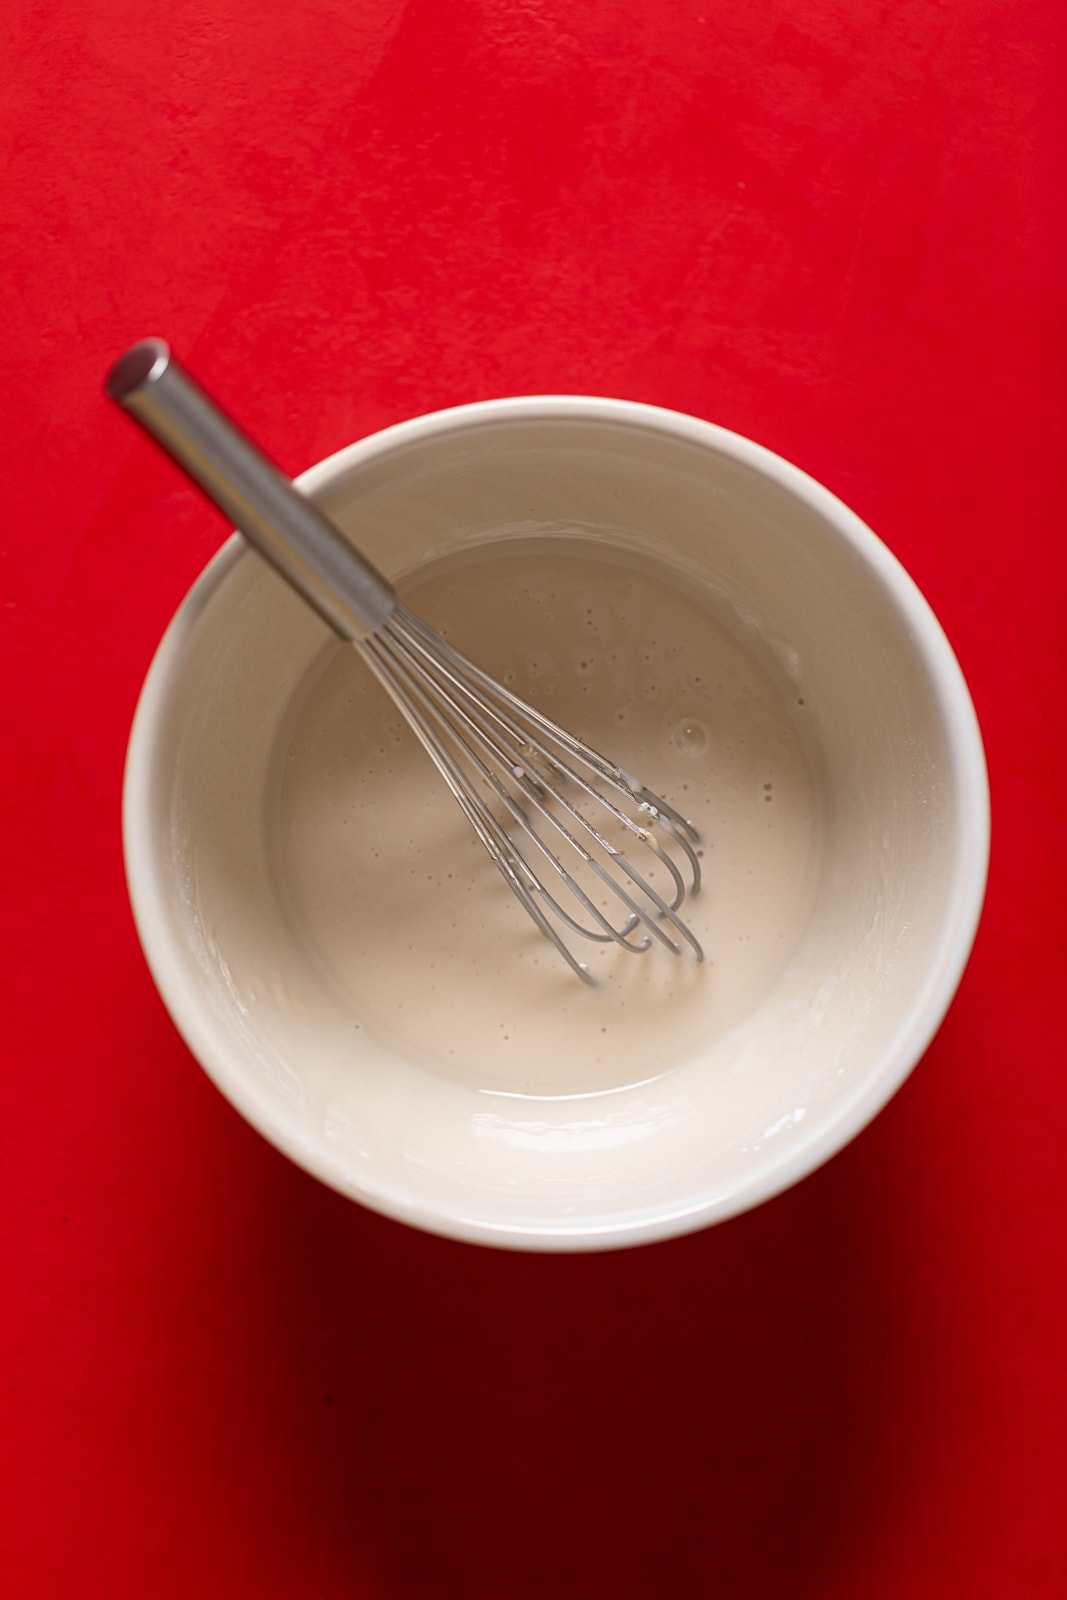 Whisk in a bowl of vanilla glaze